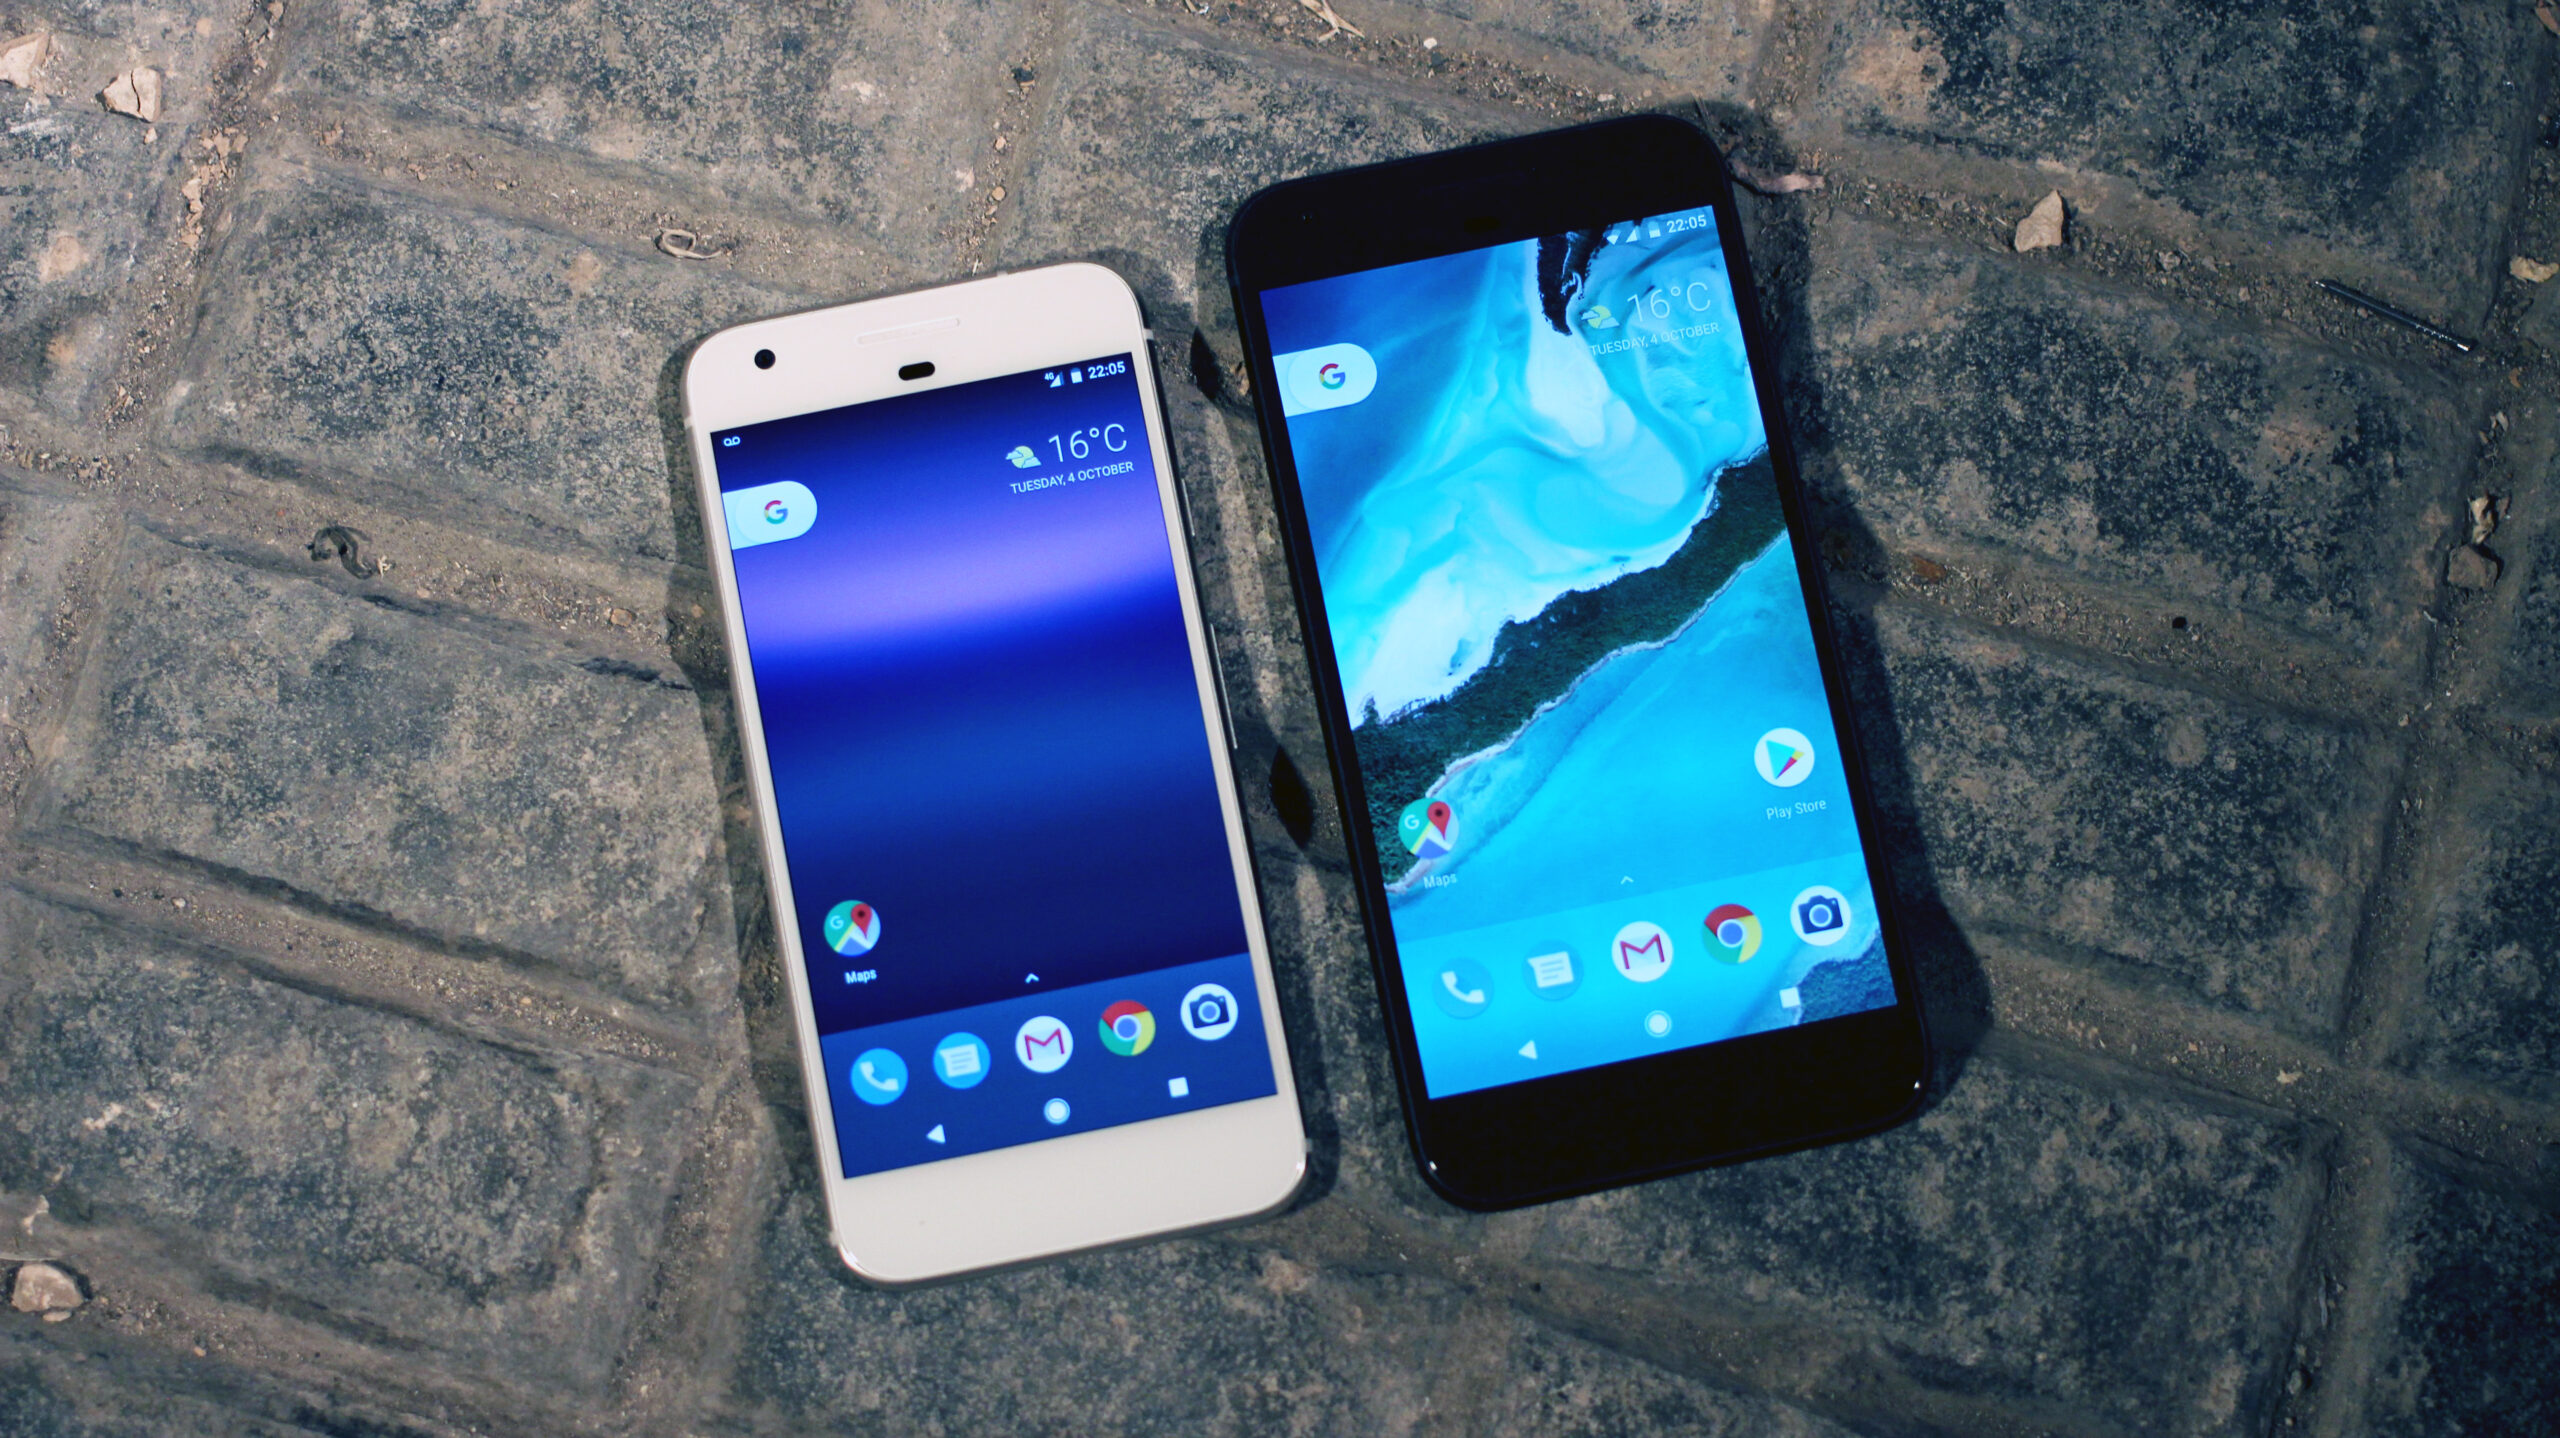 Google Pixel and Pixel XL smartphones by Android. Photo by: Author Maurizio Pesce / Wikimedia Commons